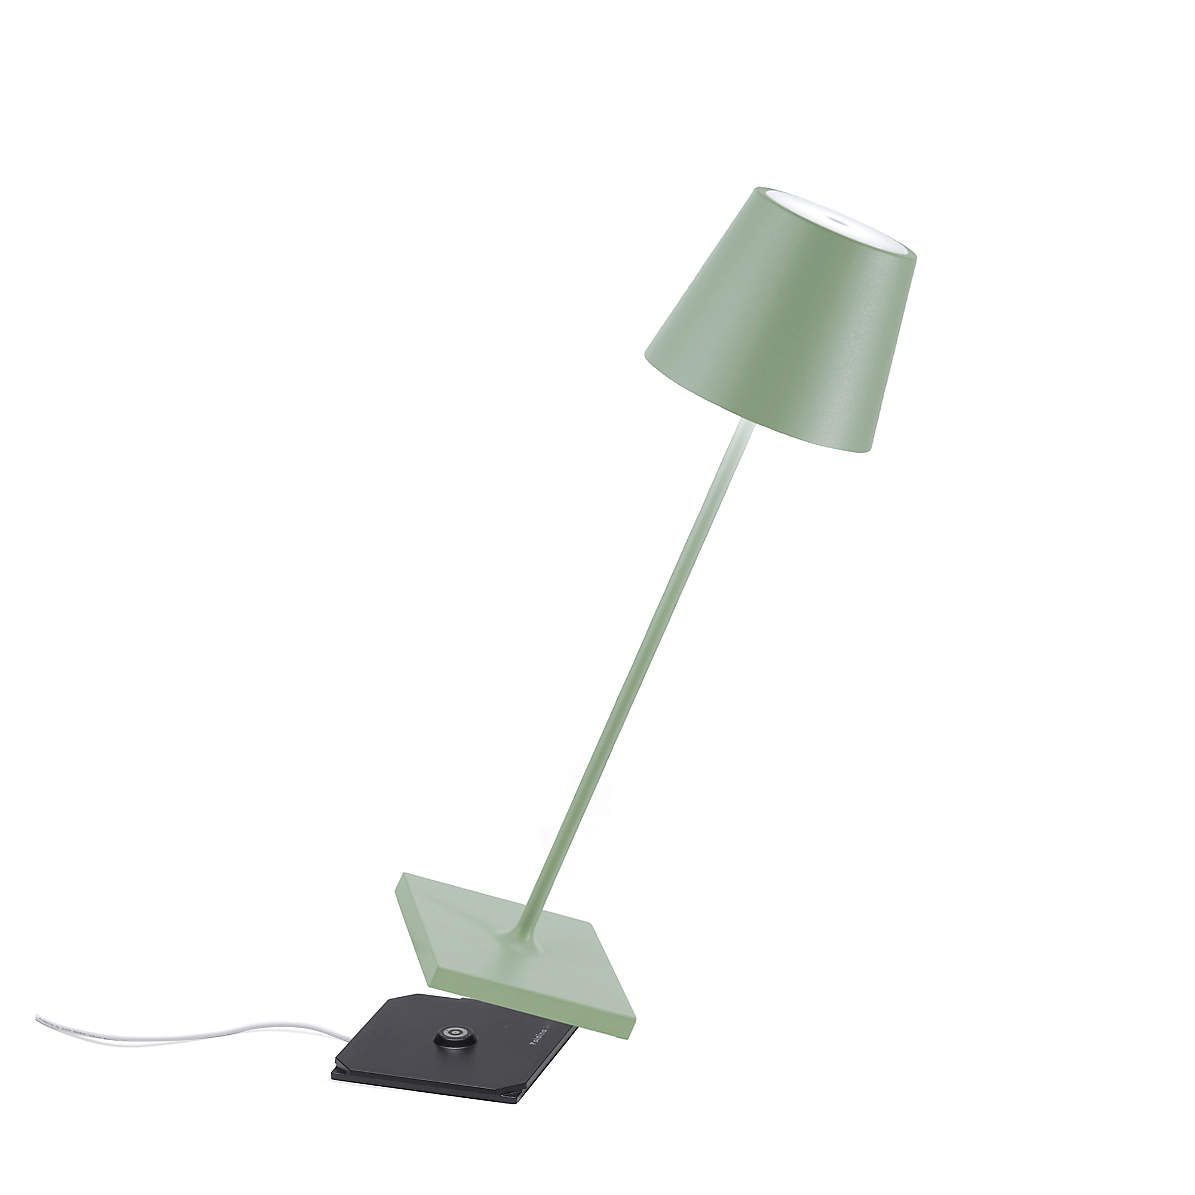 Bartlett Sage Green on Brass Cordless Lamp - Made in the USA